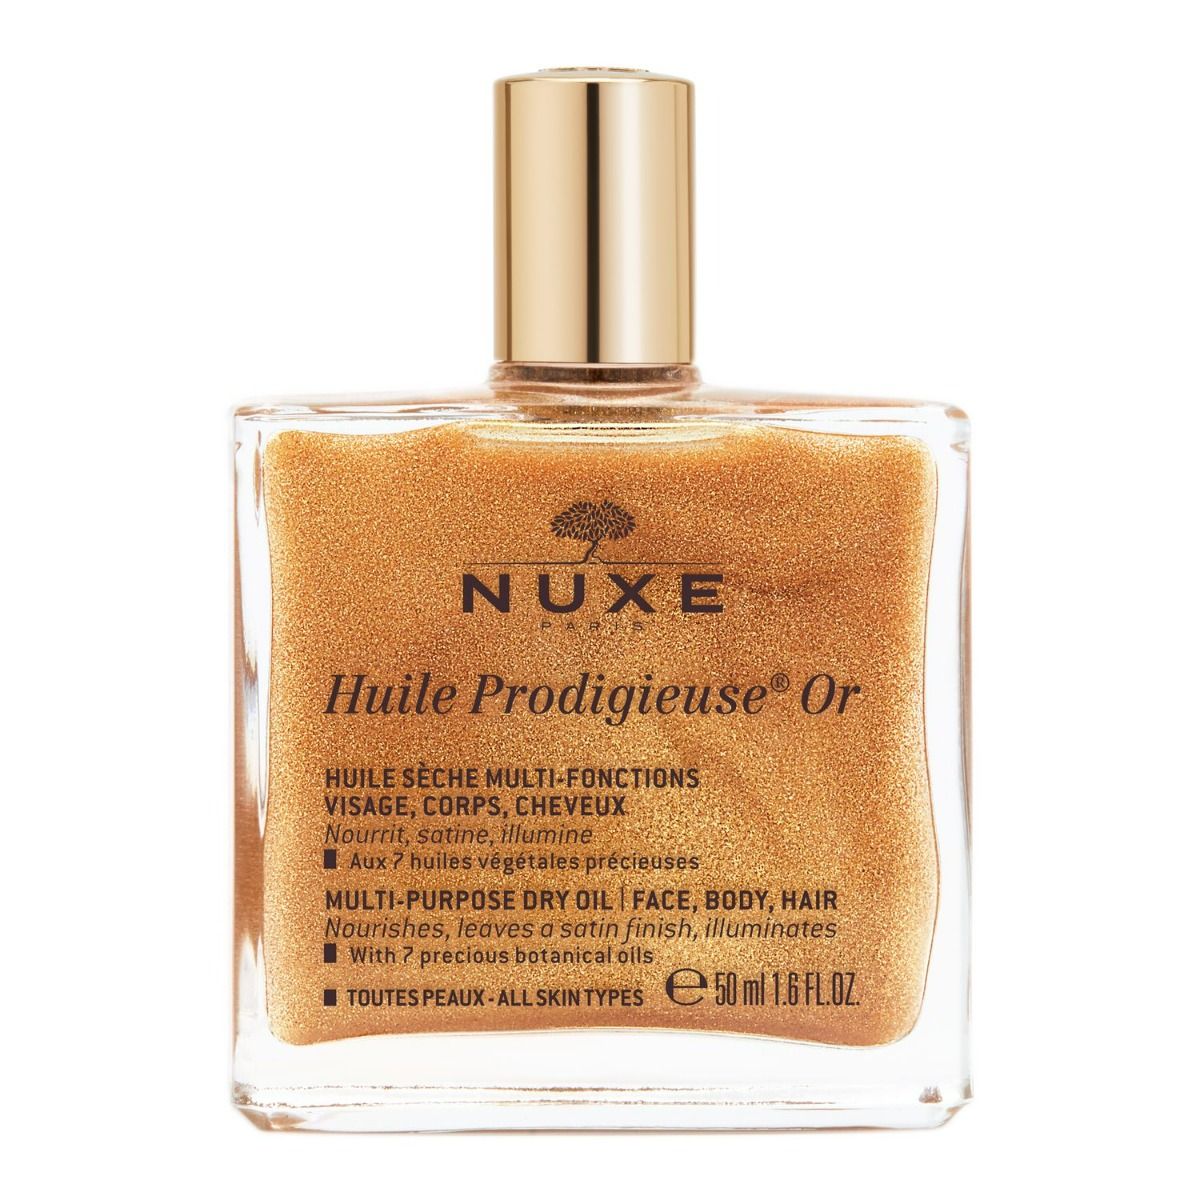 Nuxe Huile Prodigieuse Or масло для лица, тела и волос, 50 ml nuxe мерцающее сухое масло для лица тела и волос huile or 100 мл nuxe prodigieuse